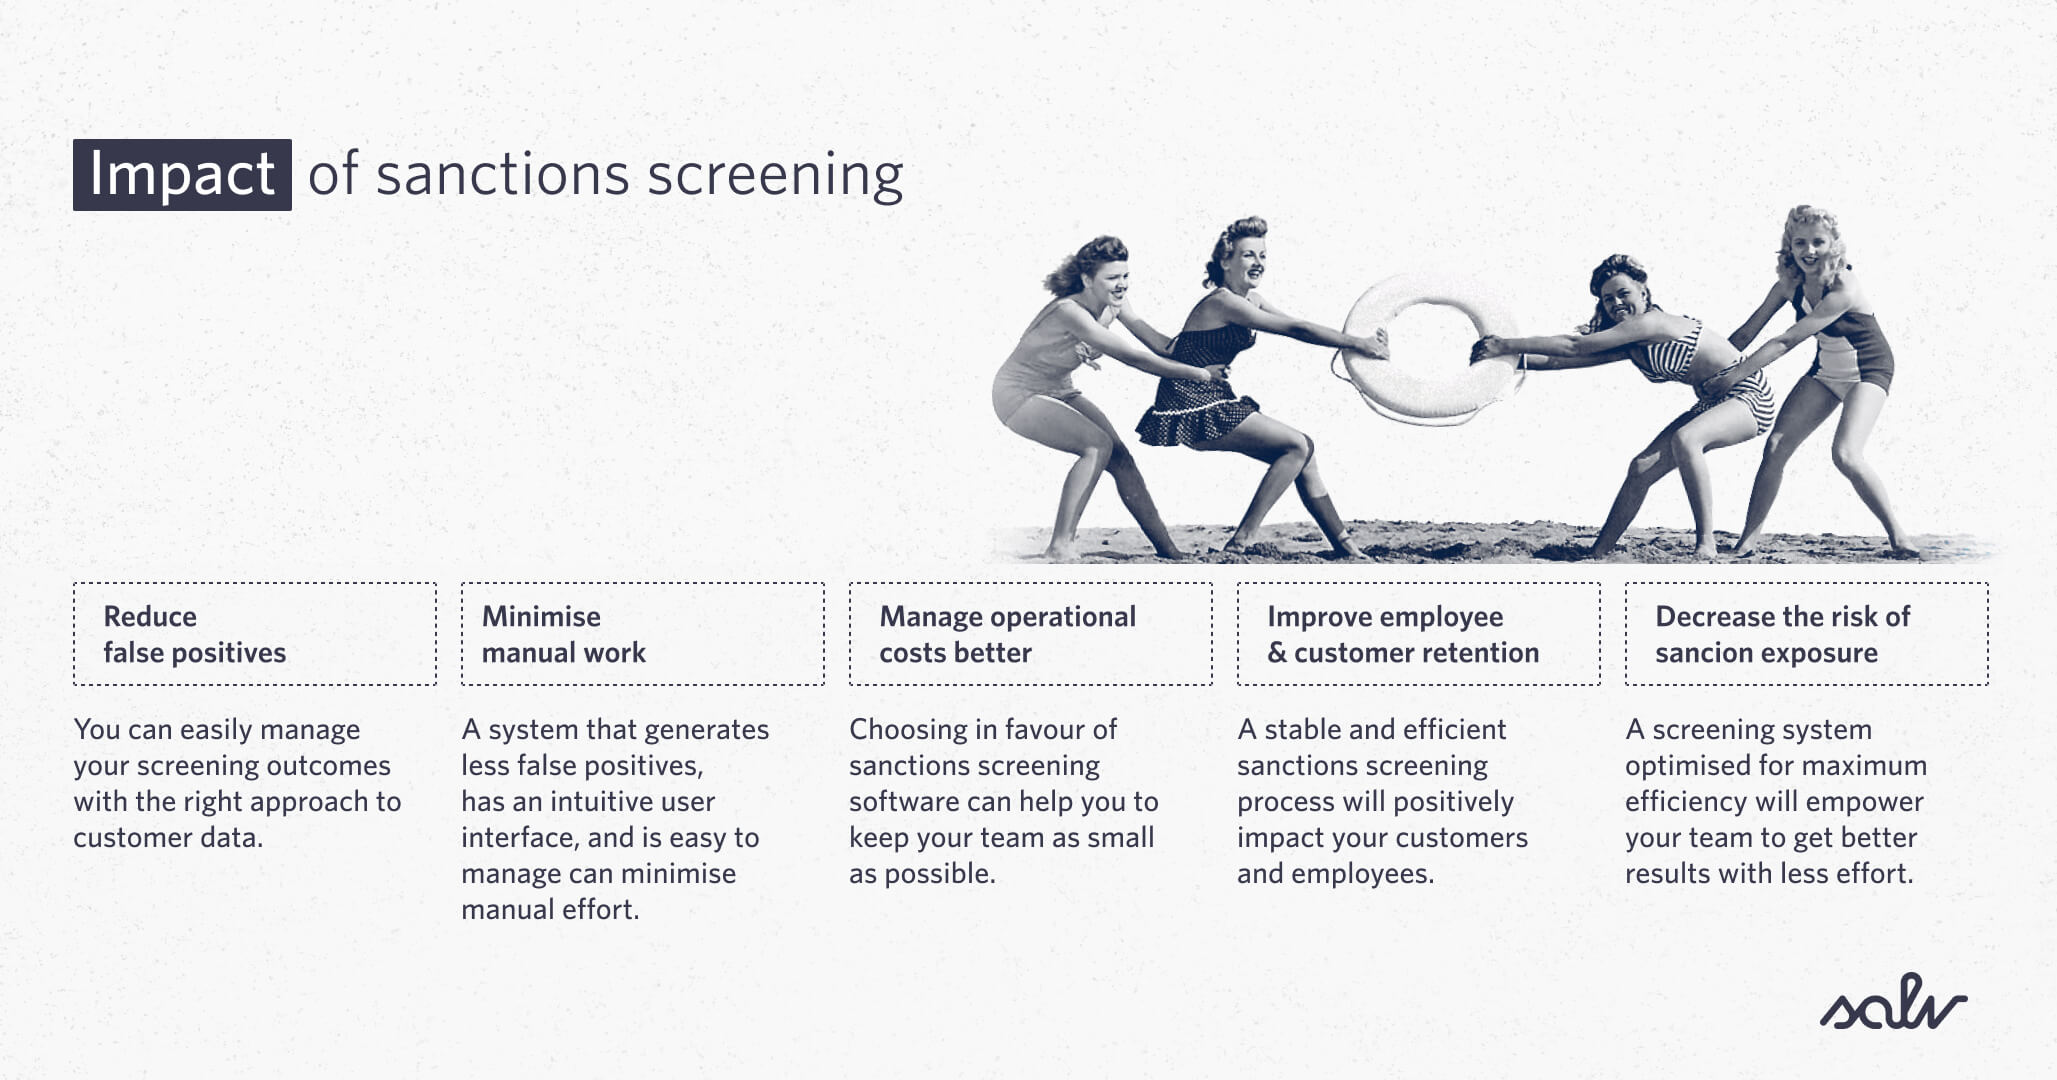 Illustration about the impact of sanctions screening